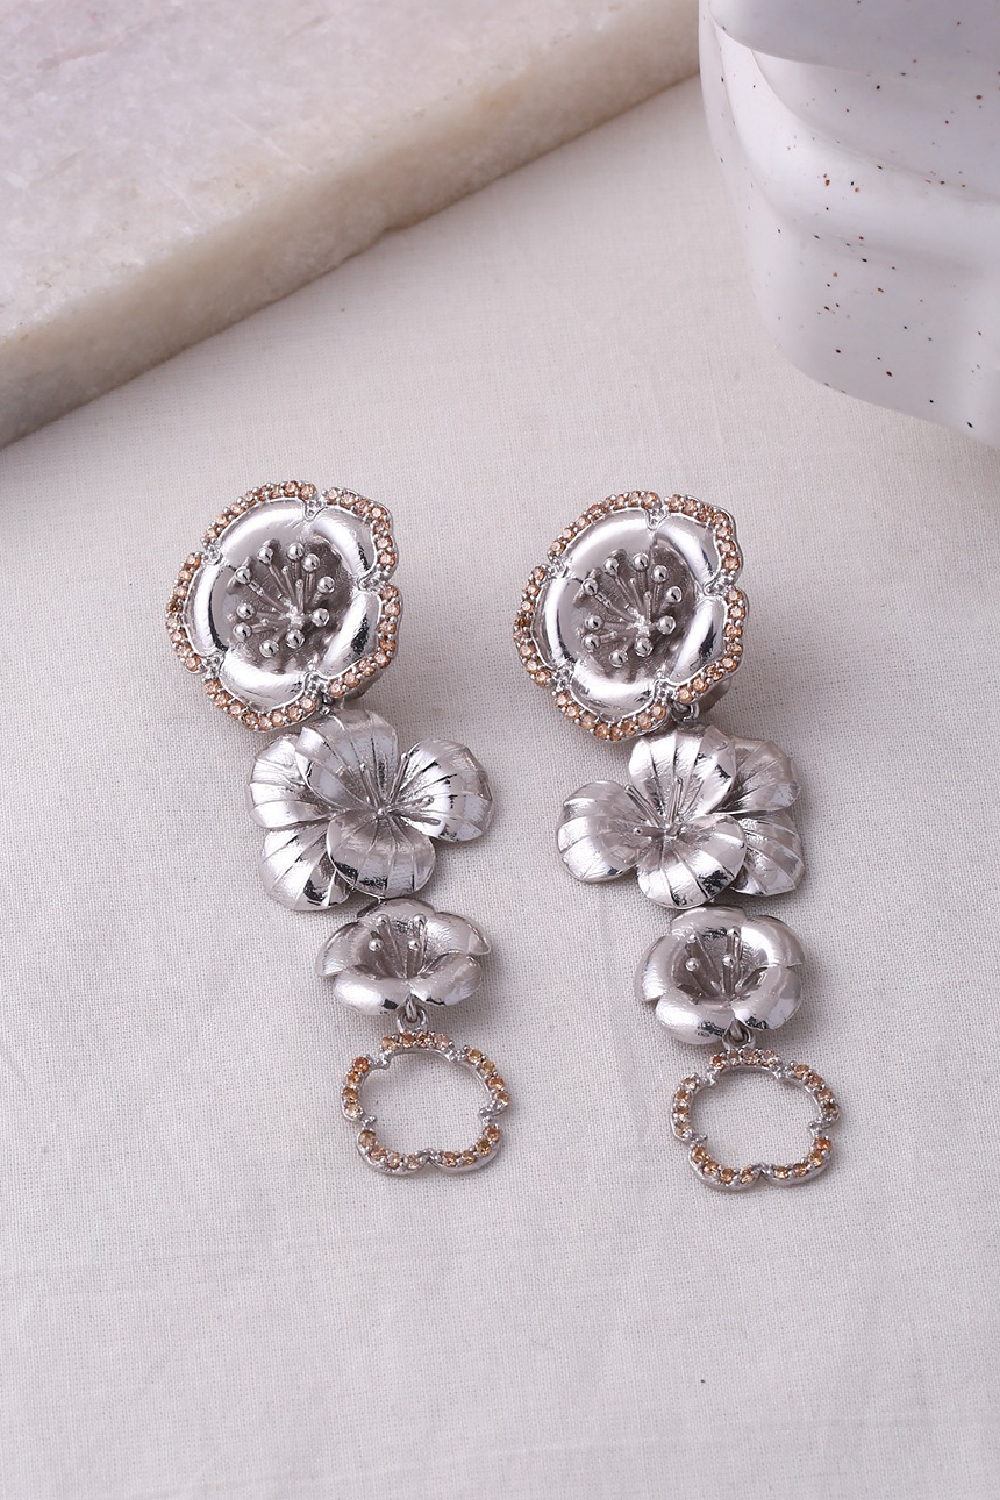 Gilded Pansy Earrings - Silver Textured Finish